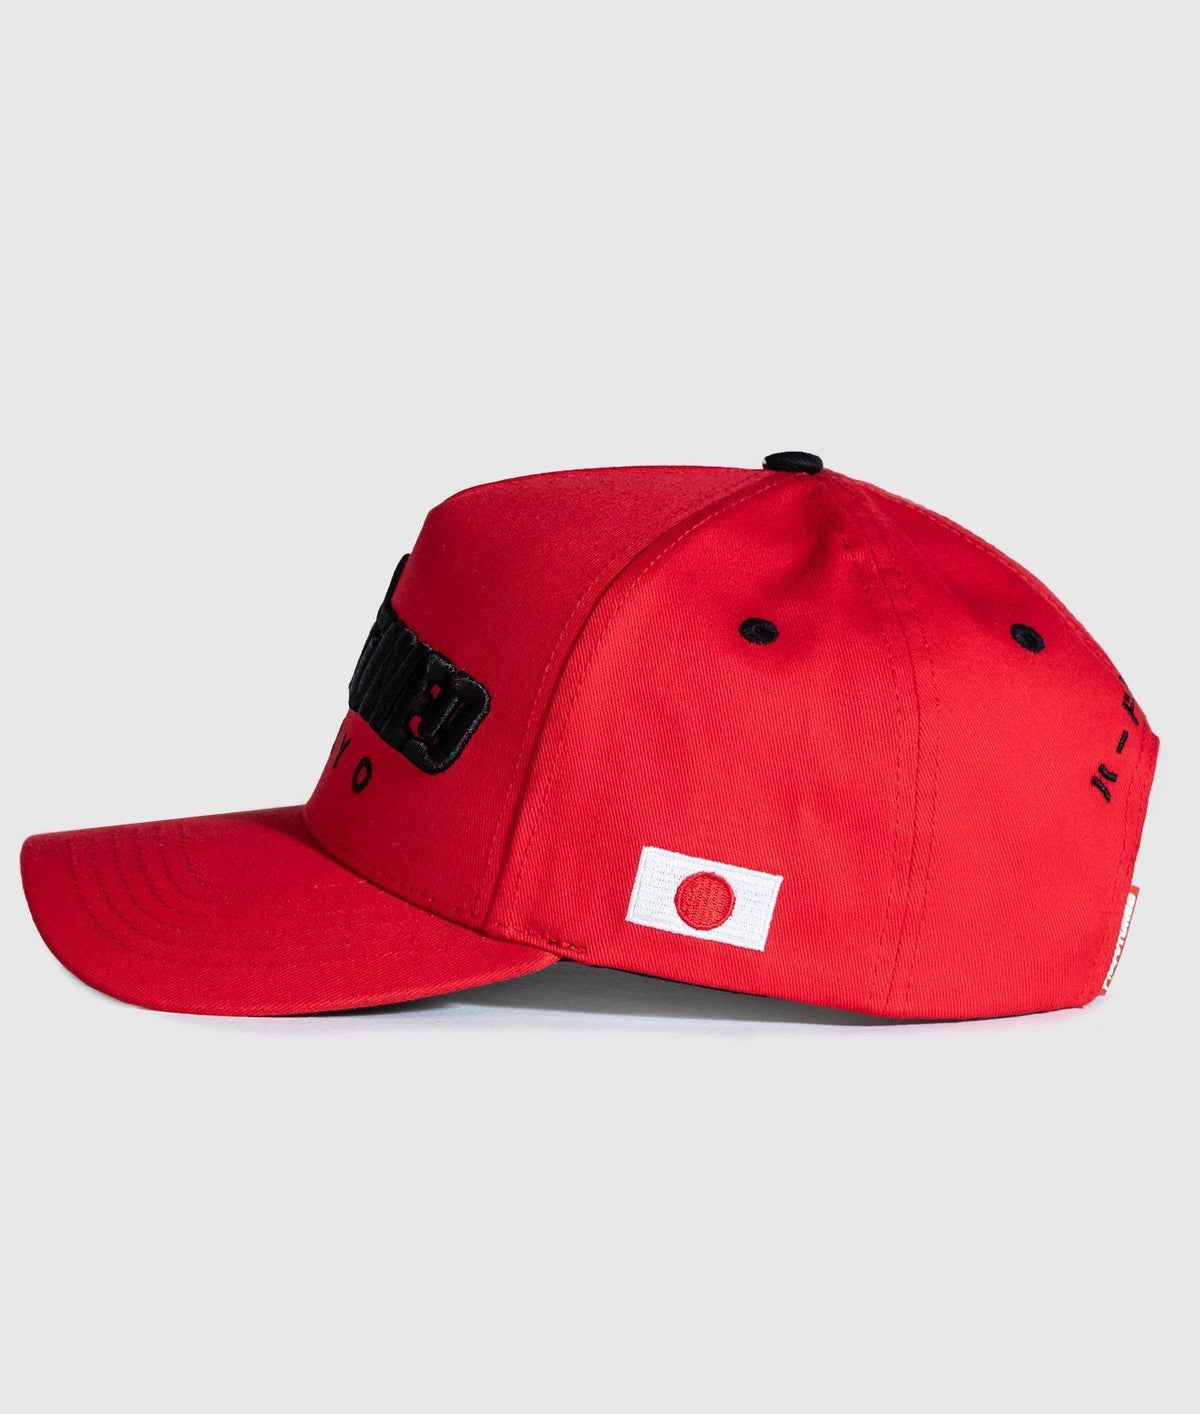 Hardtuned Tokyo Red A-Frame Cap